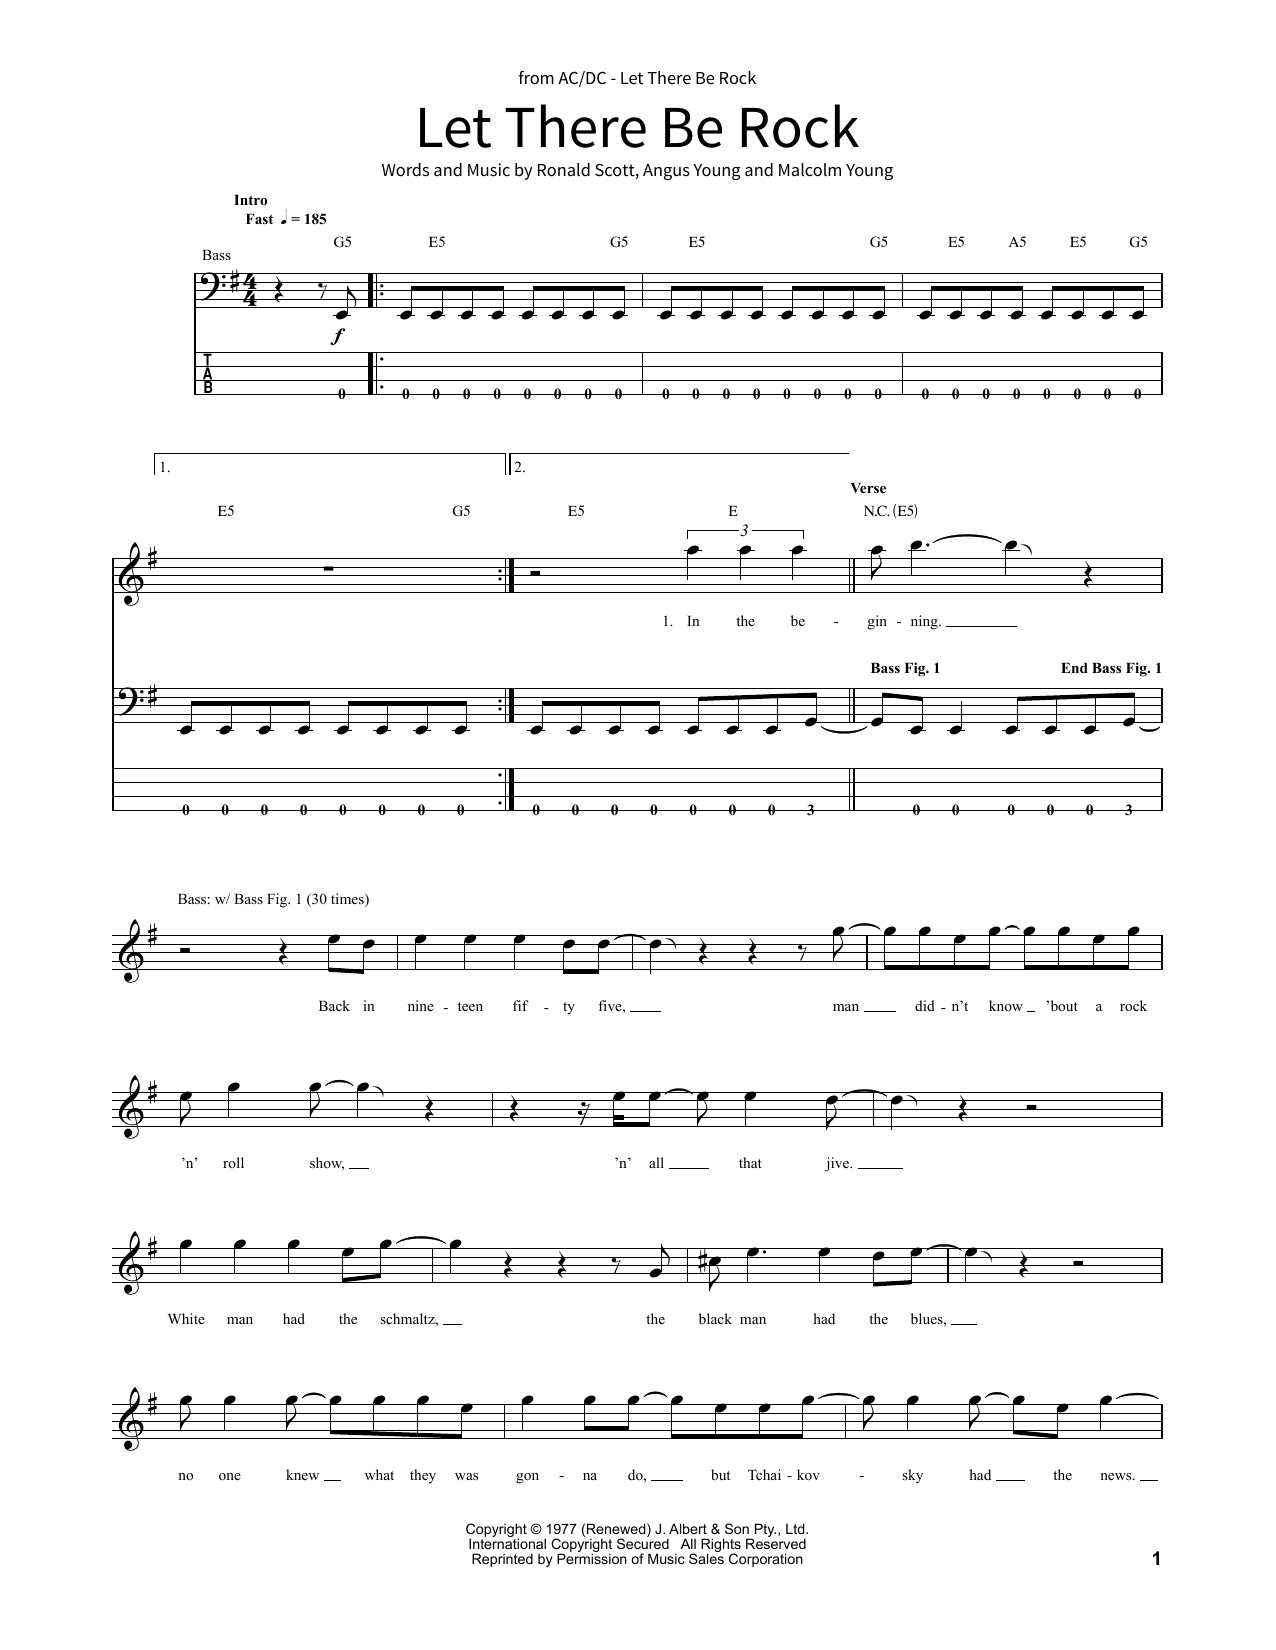 AC/DC Let There Be Rock sheet music notes and chords. Download Printable PDF.